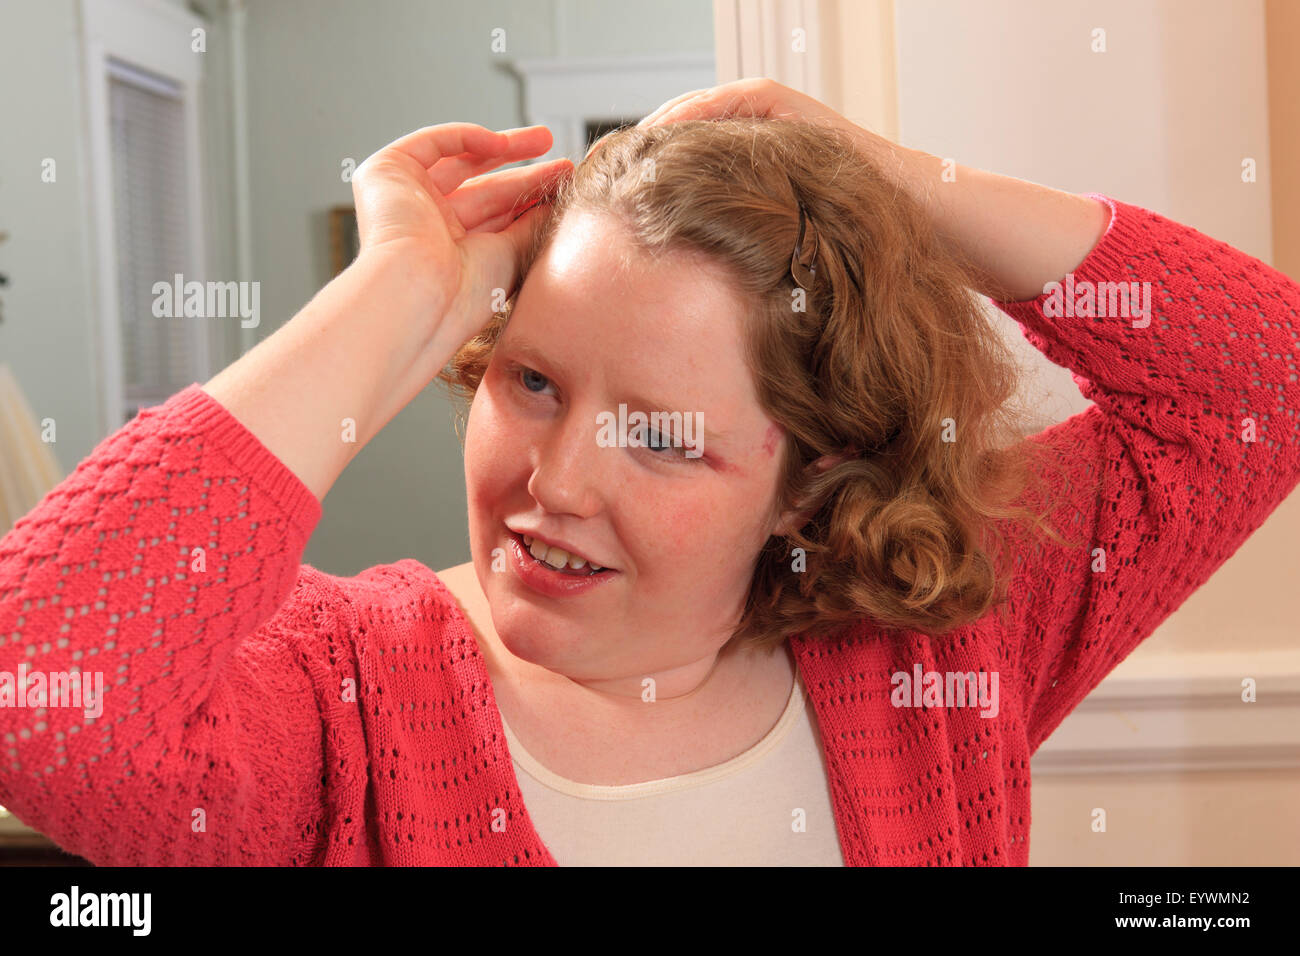 Young woman with Autism fixing her hair Stock Photo